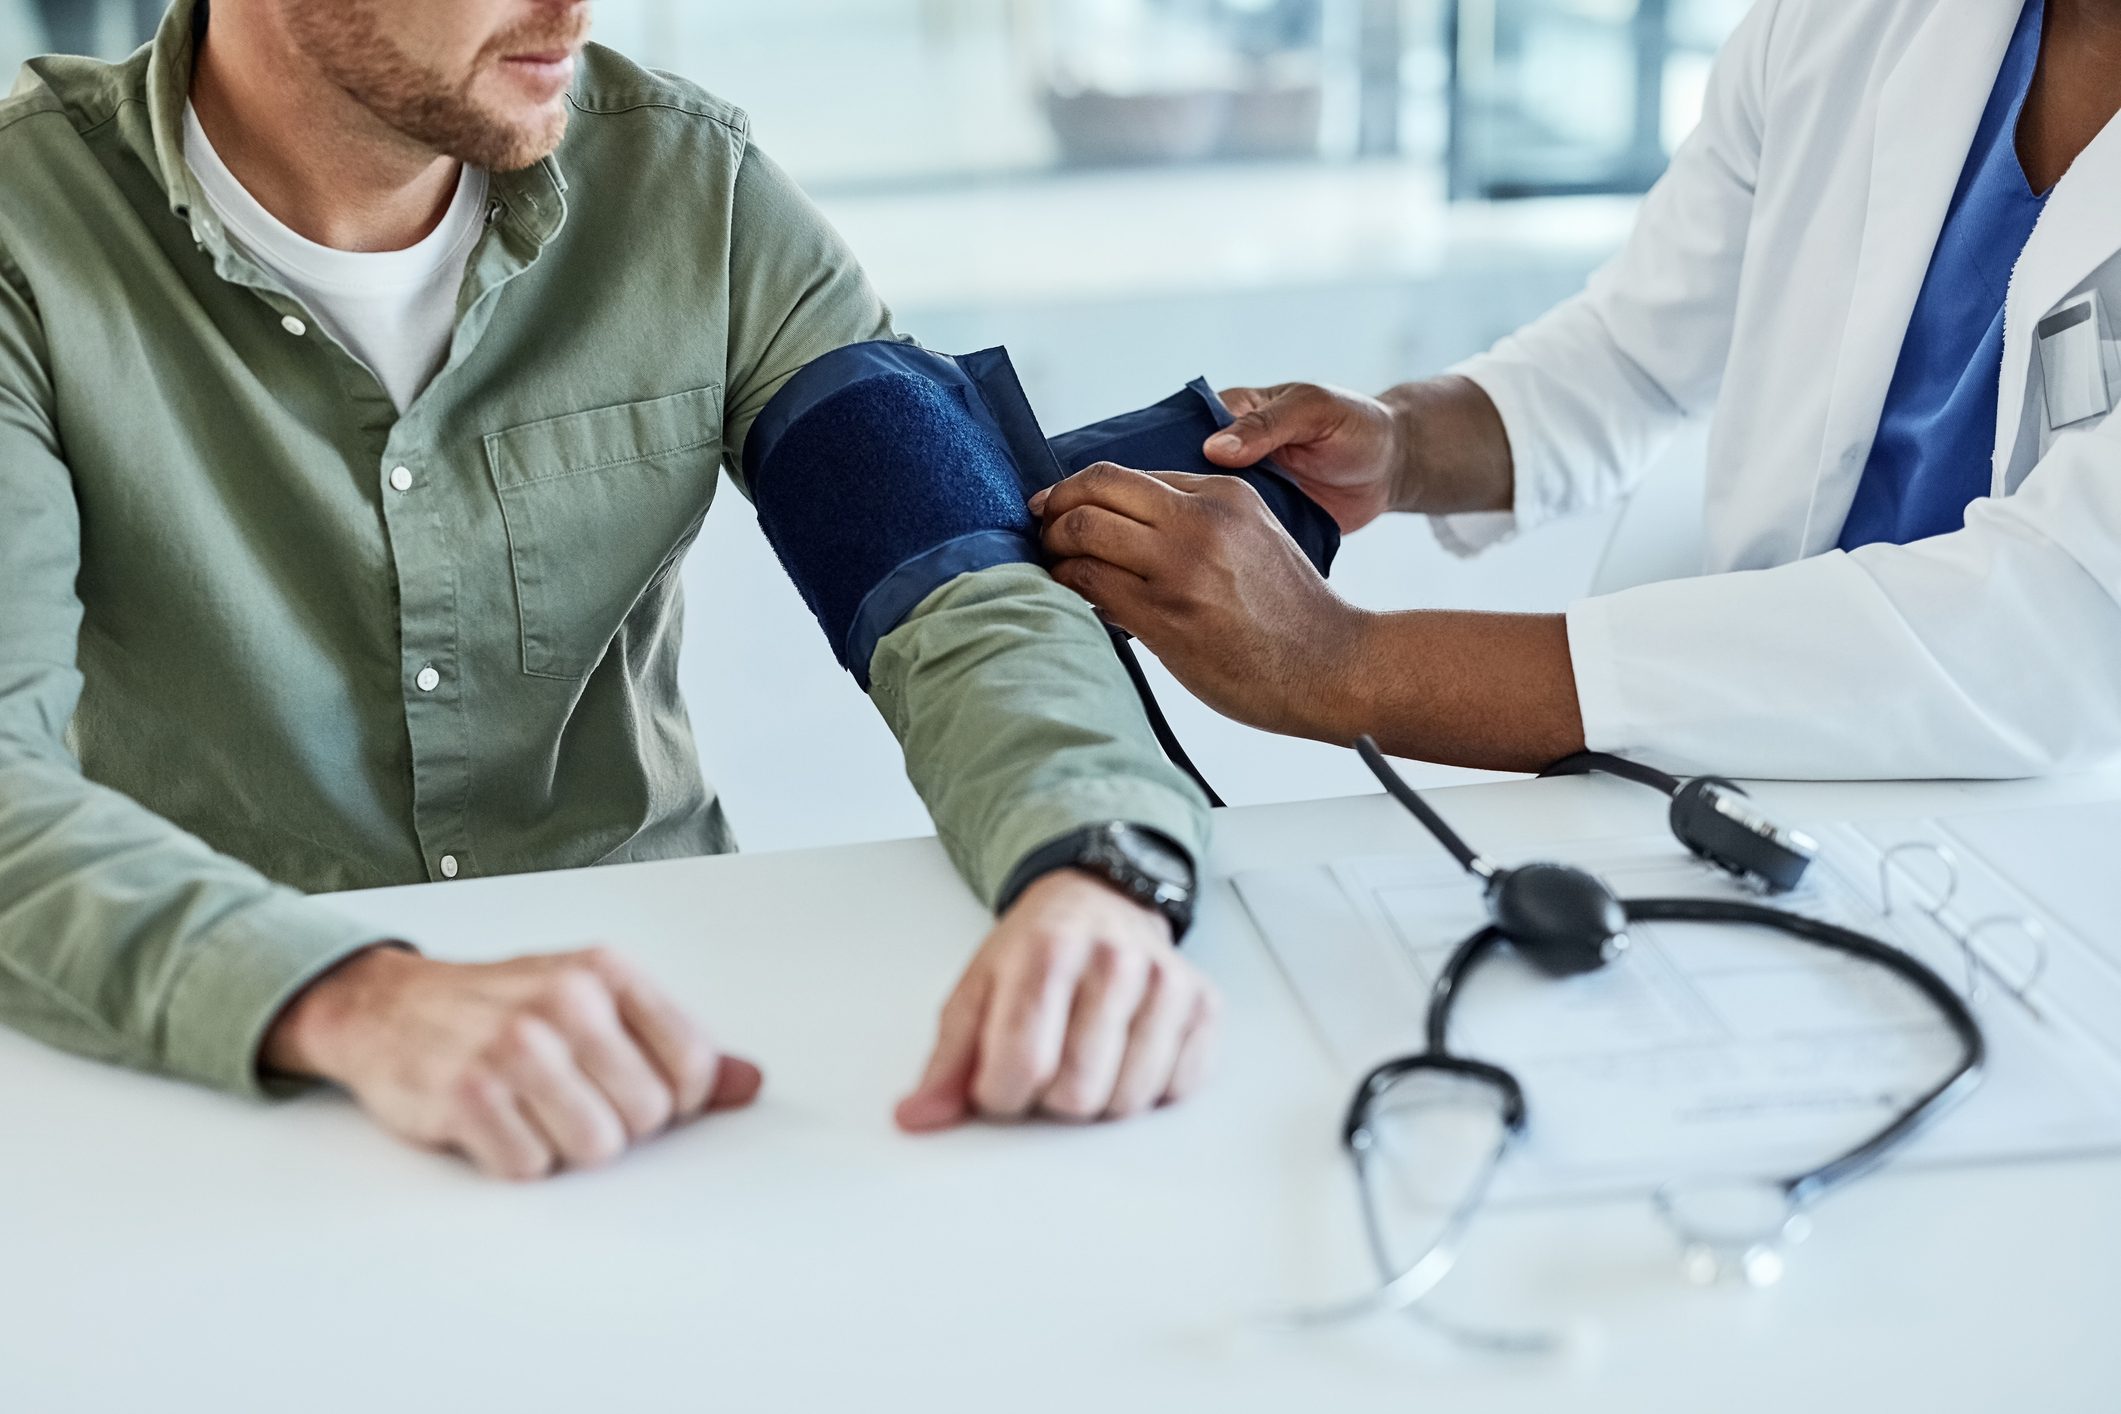 High Blood Pressure: Symptoms, Treatments, and Causes